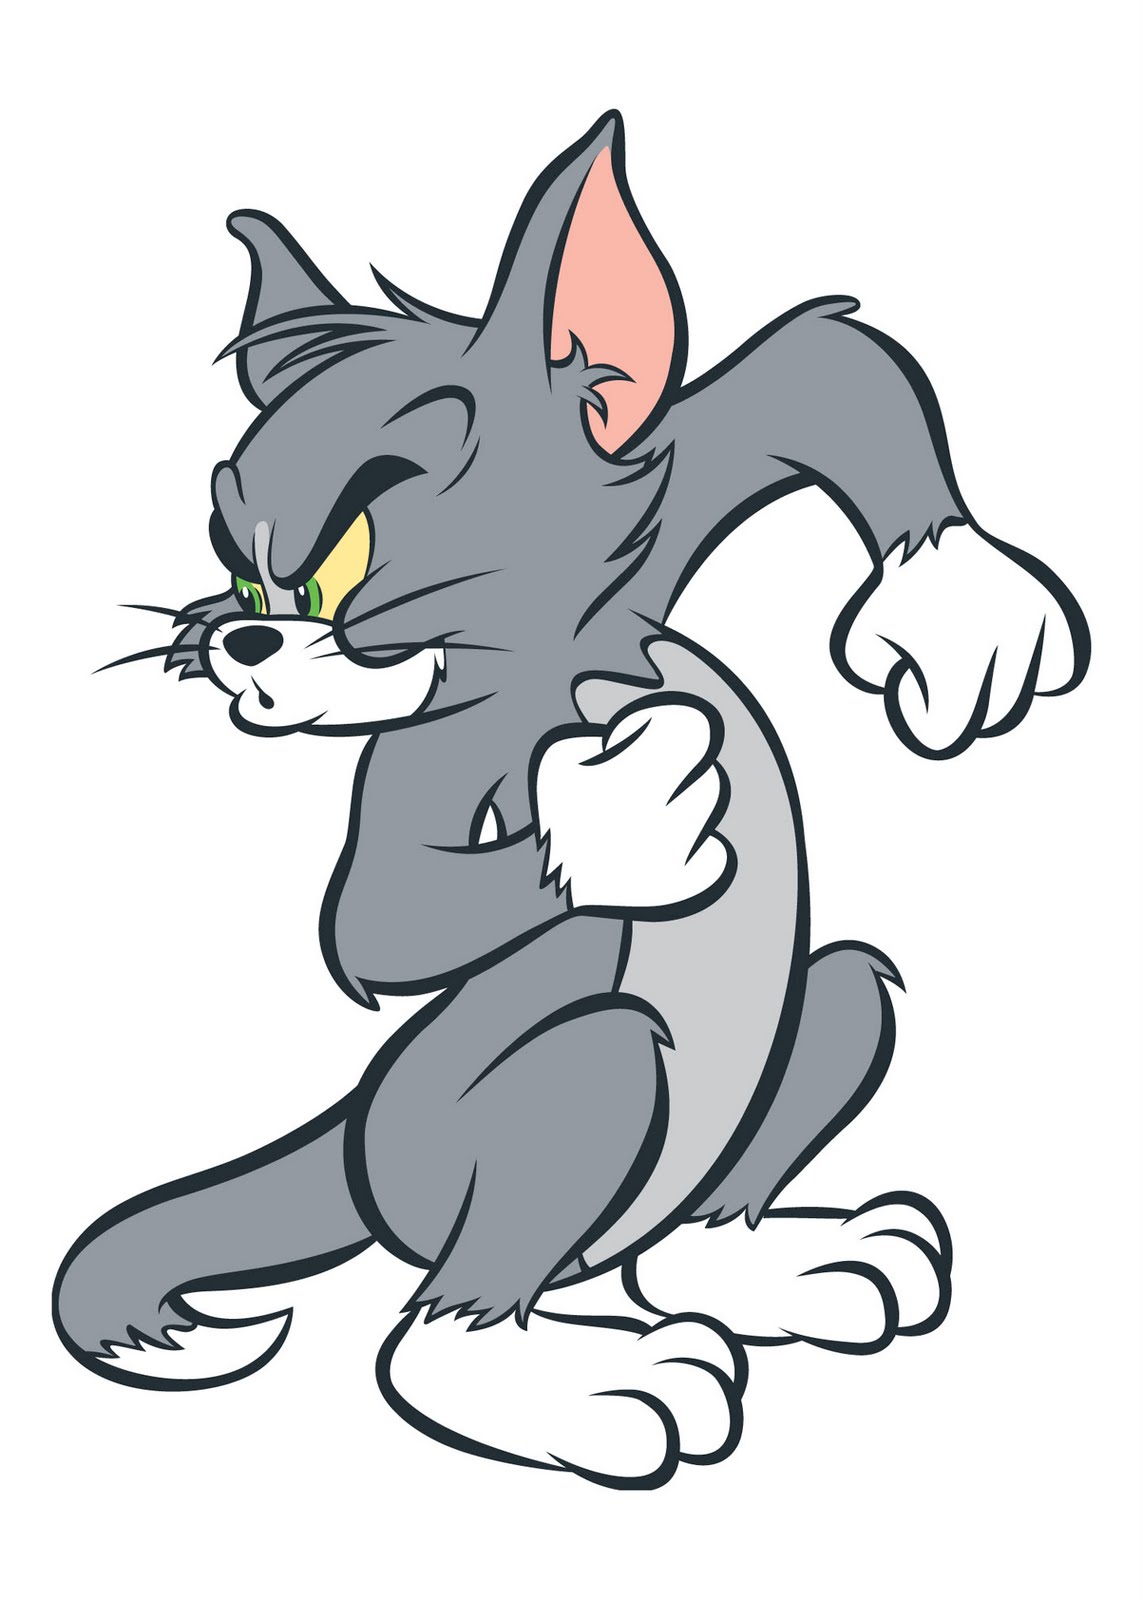 tom and jerry drawing